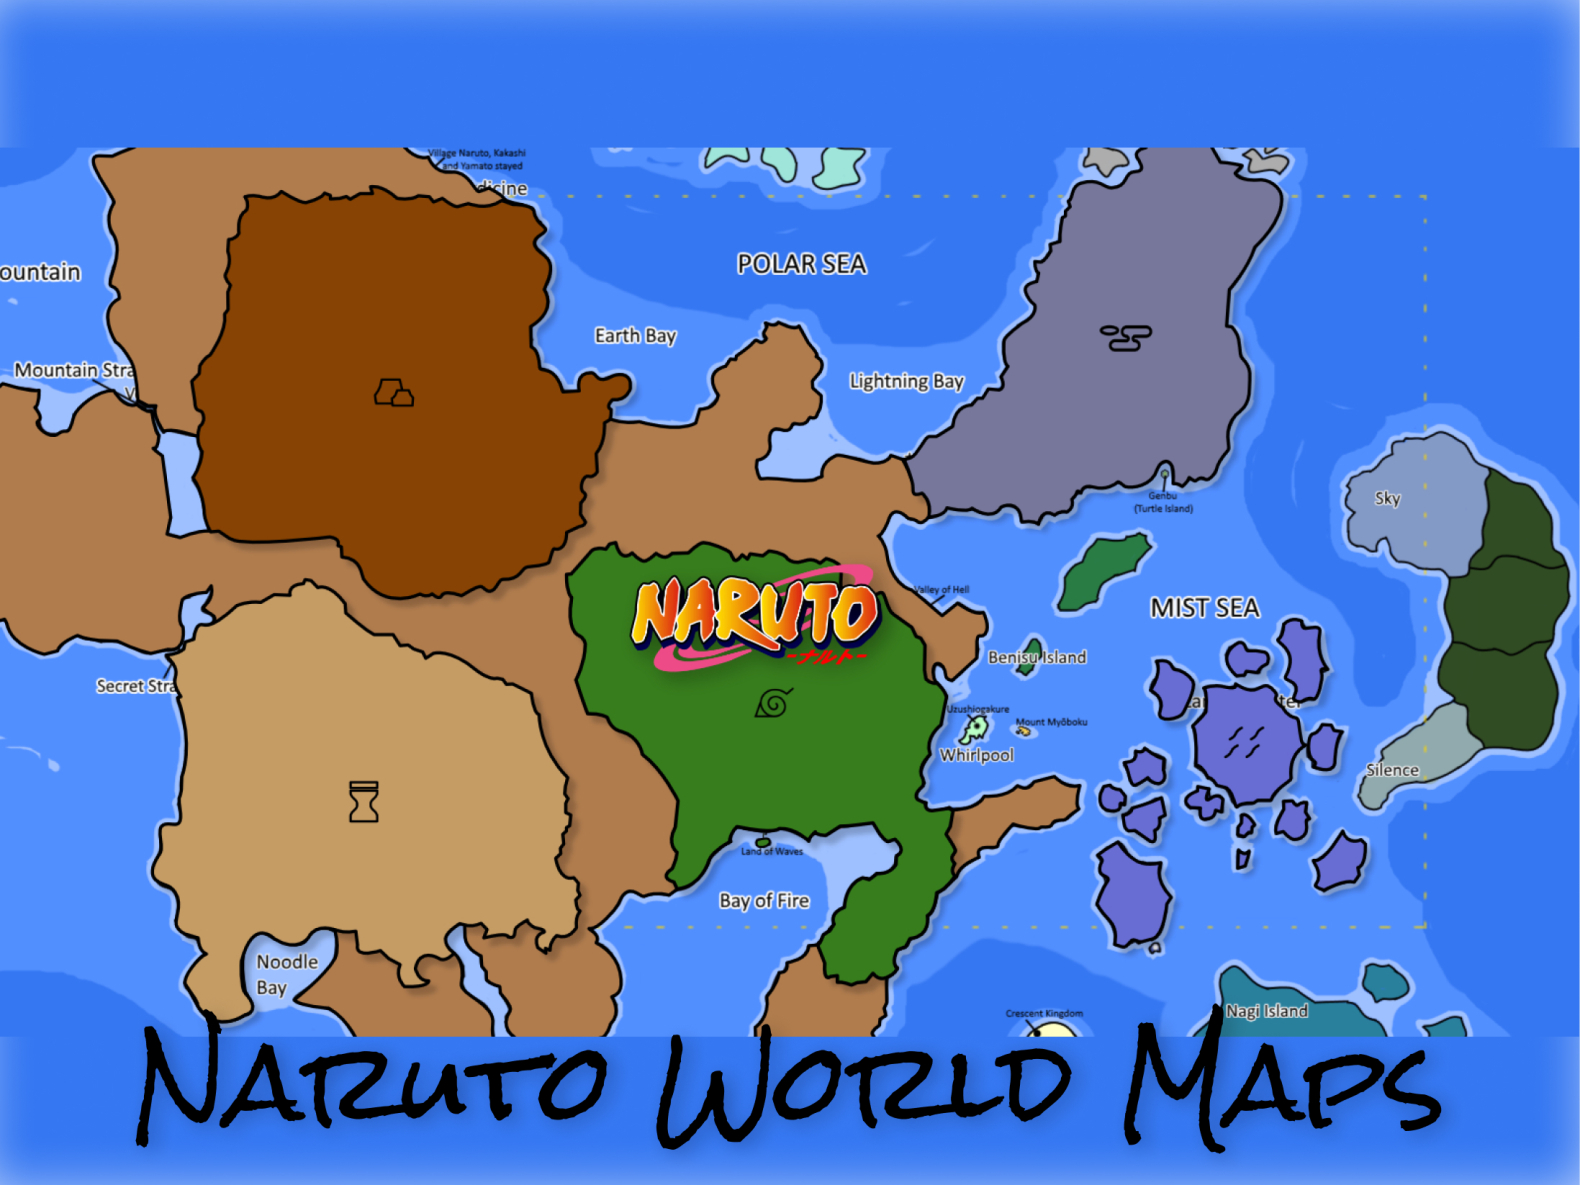 Is this the full official word map of the Naruto Universe ?